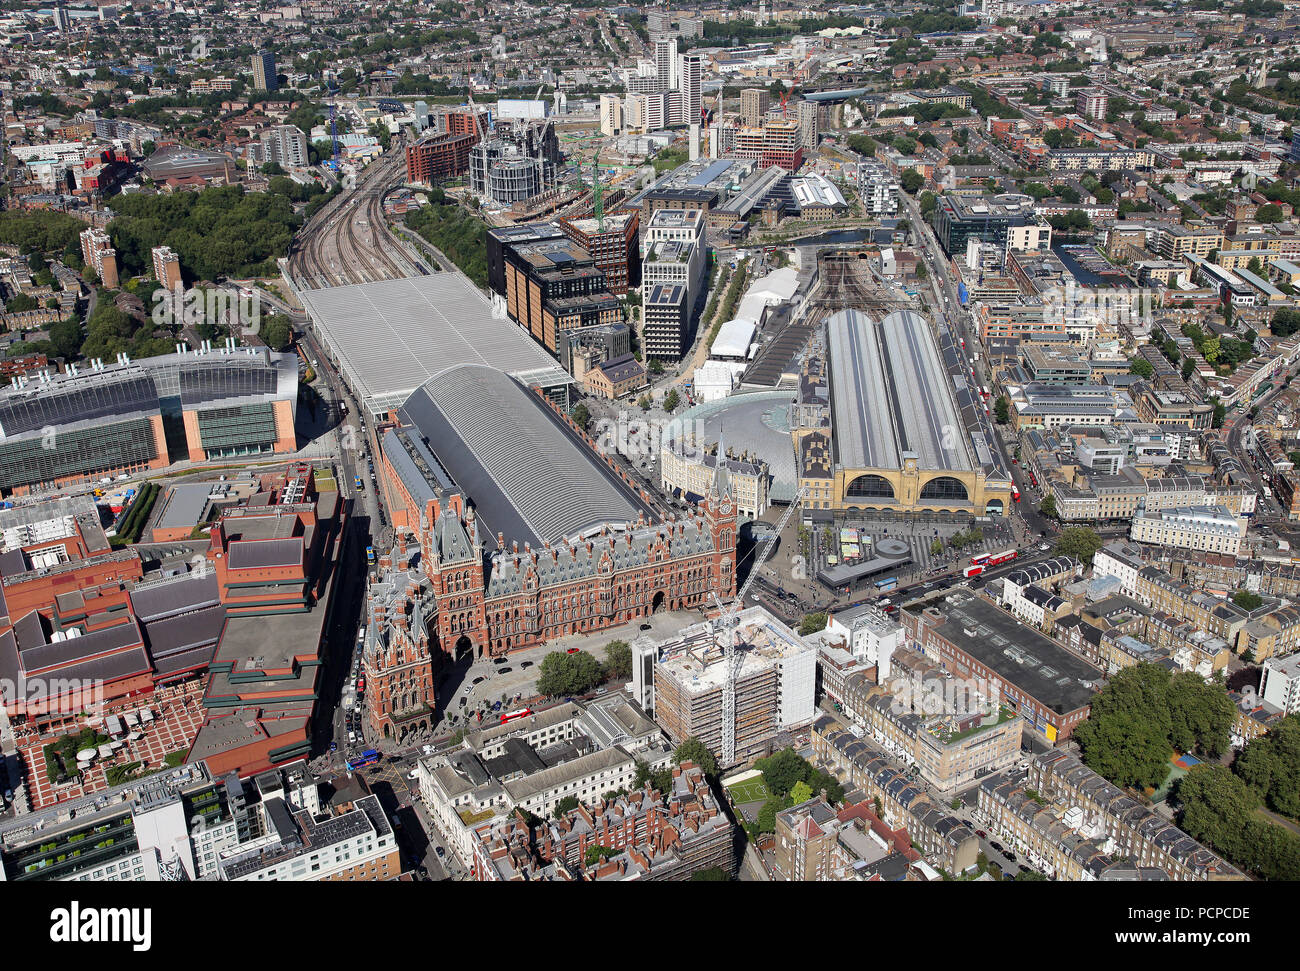 London St Pancras & Kings Cross Stations from the air. 8.9.16 Stock Photo